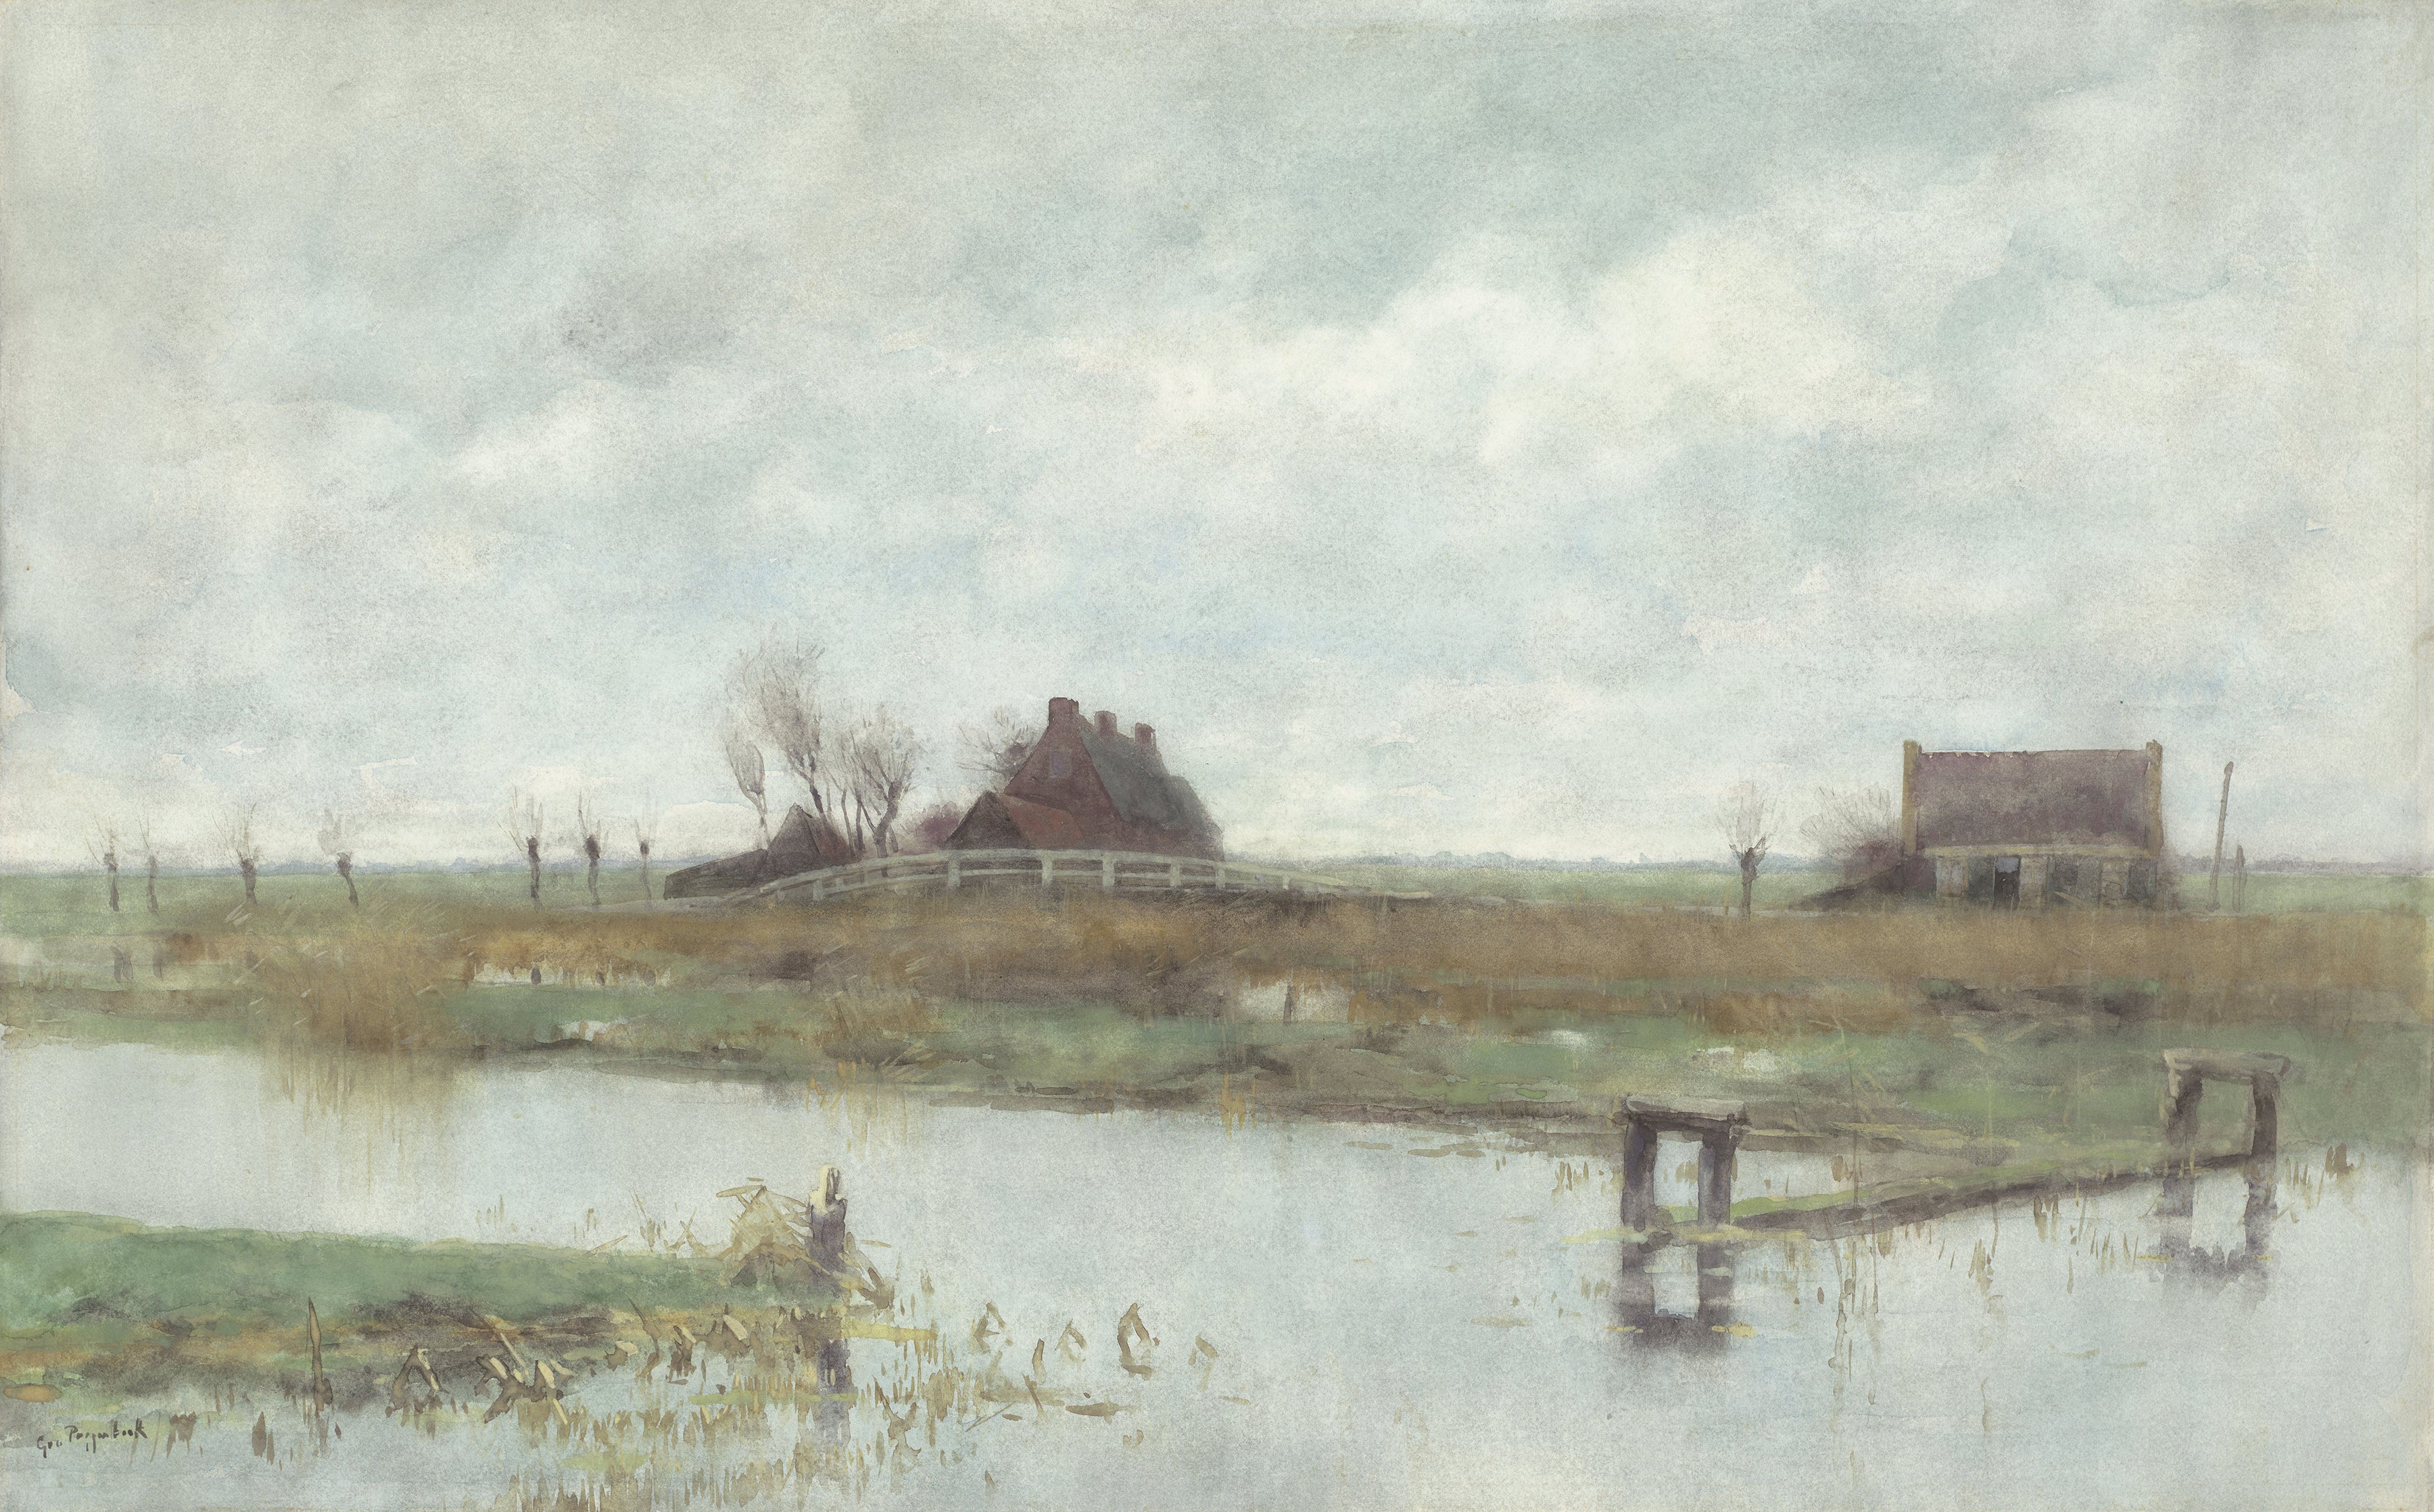 Detailed view of the River Landscape - Vintage Mural, highlighting its soft color palette and the delicate portrayal of a rustic countryside. The scene includes a tranquil river, rustic homes, and a sparse landscape, captured with artistic brushstrokes that convey a sense of calm and timelessness.